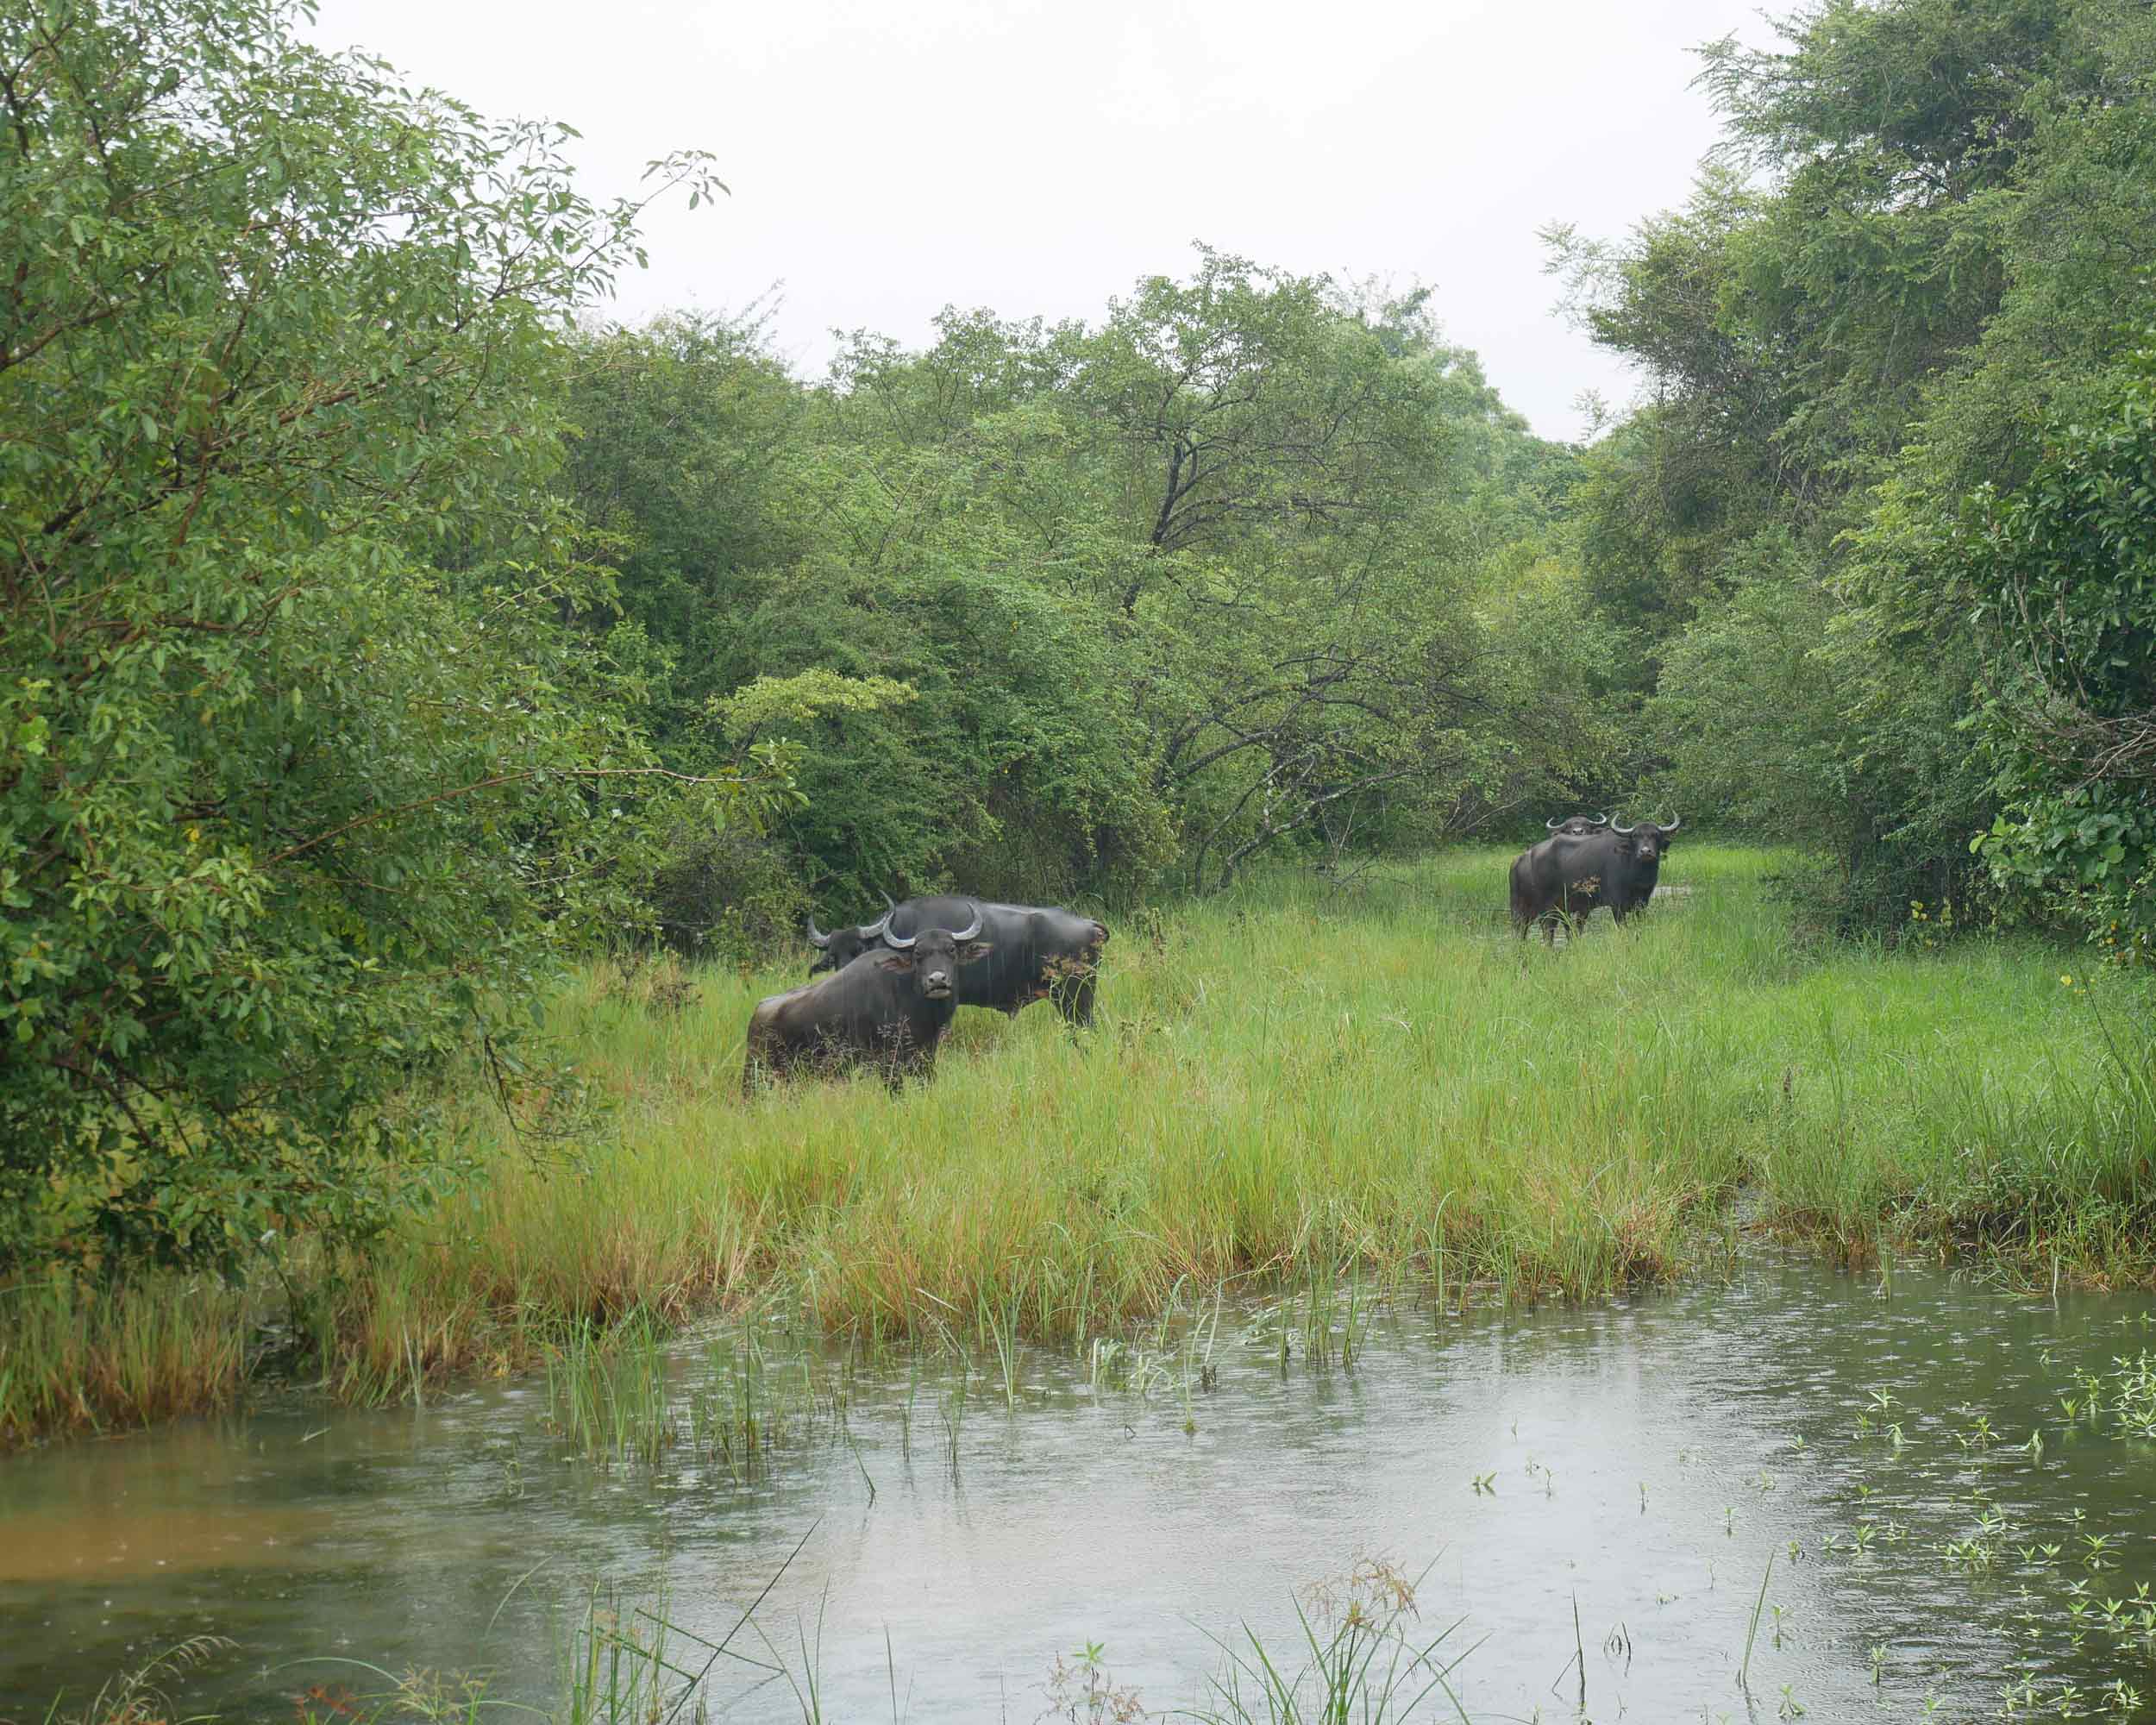  Water buffalo were curious of our Jeep. 